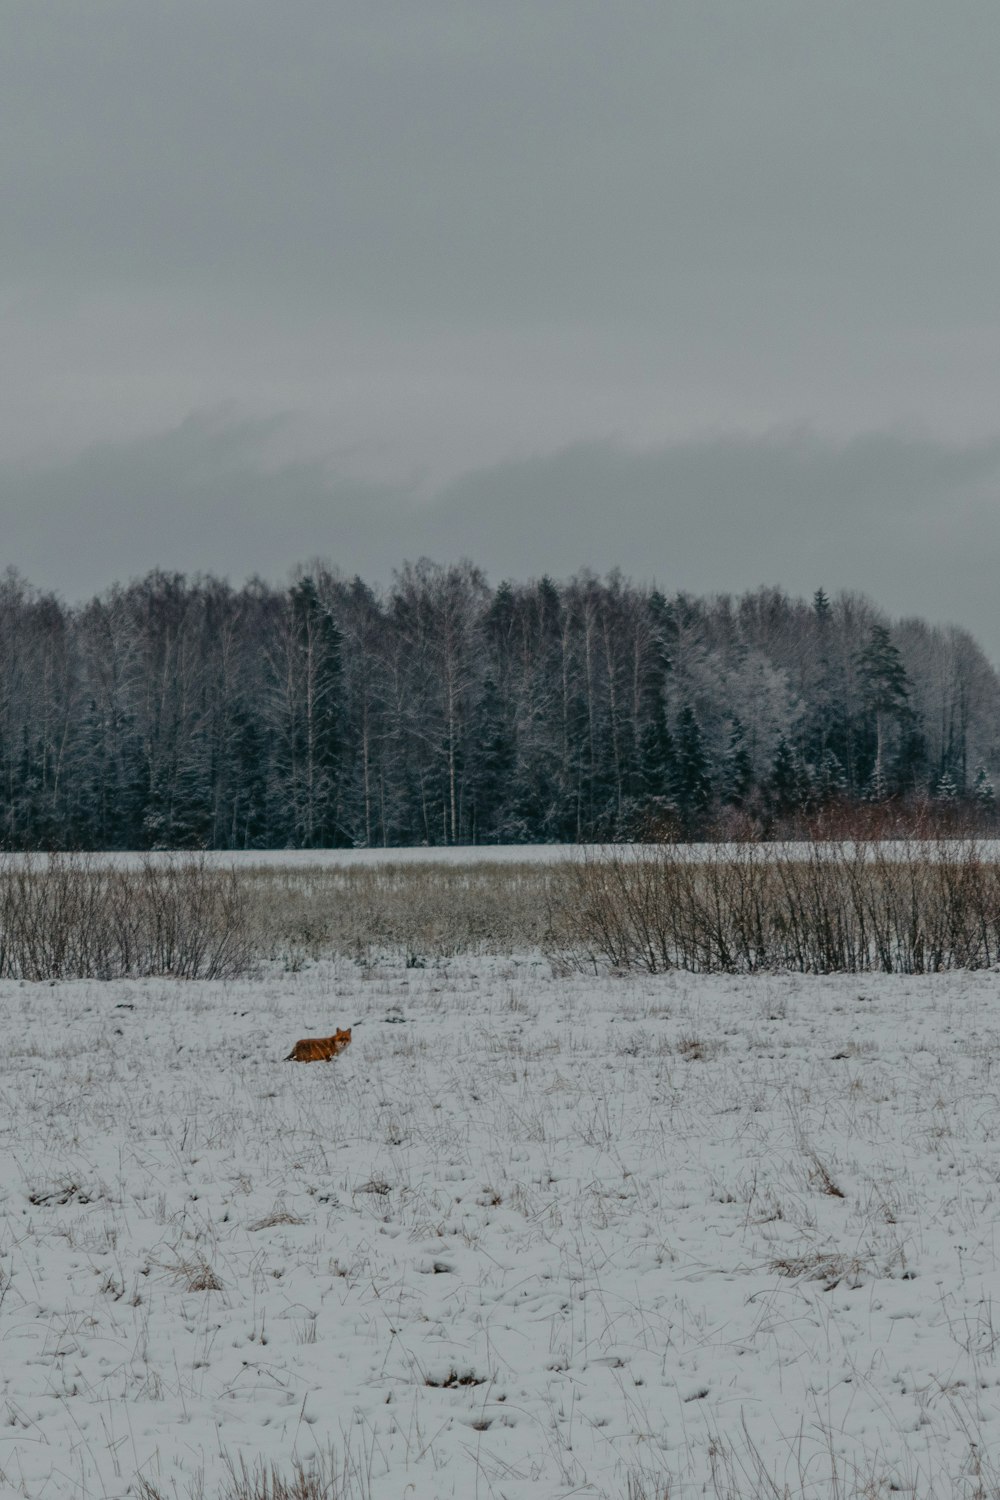 a dog running through a snowy field with trees in the background